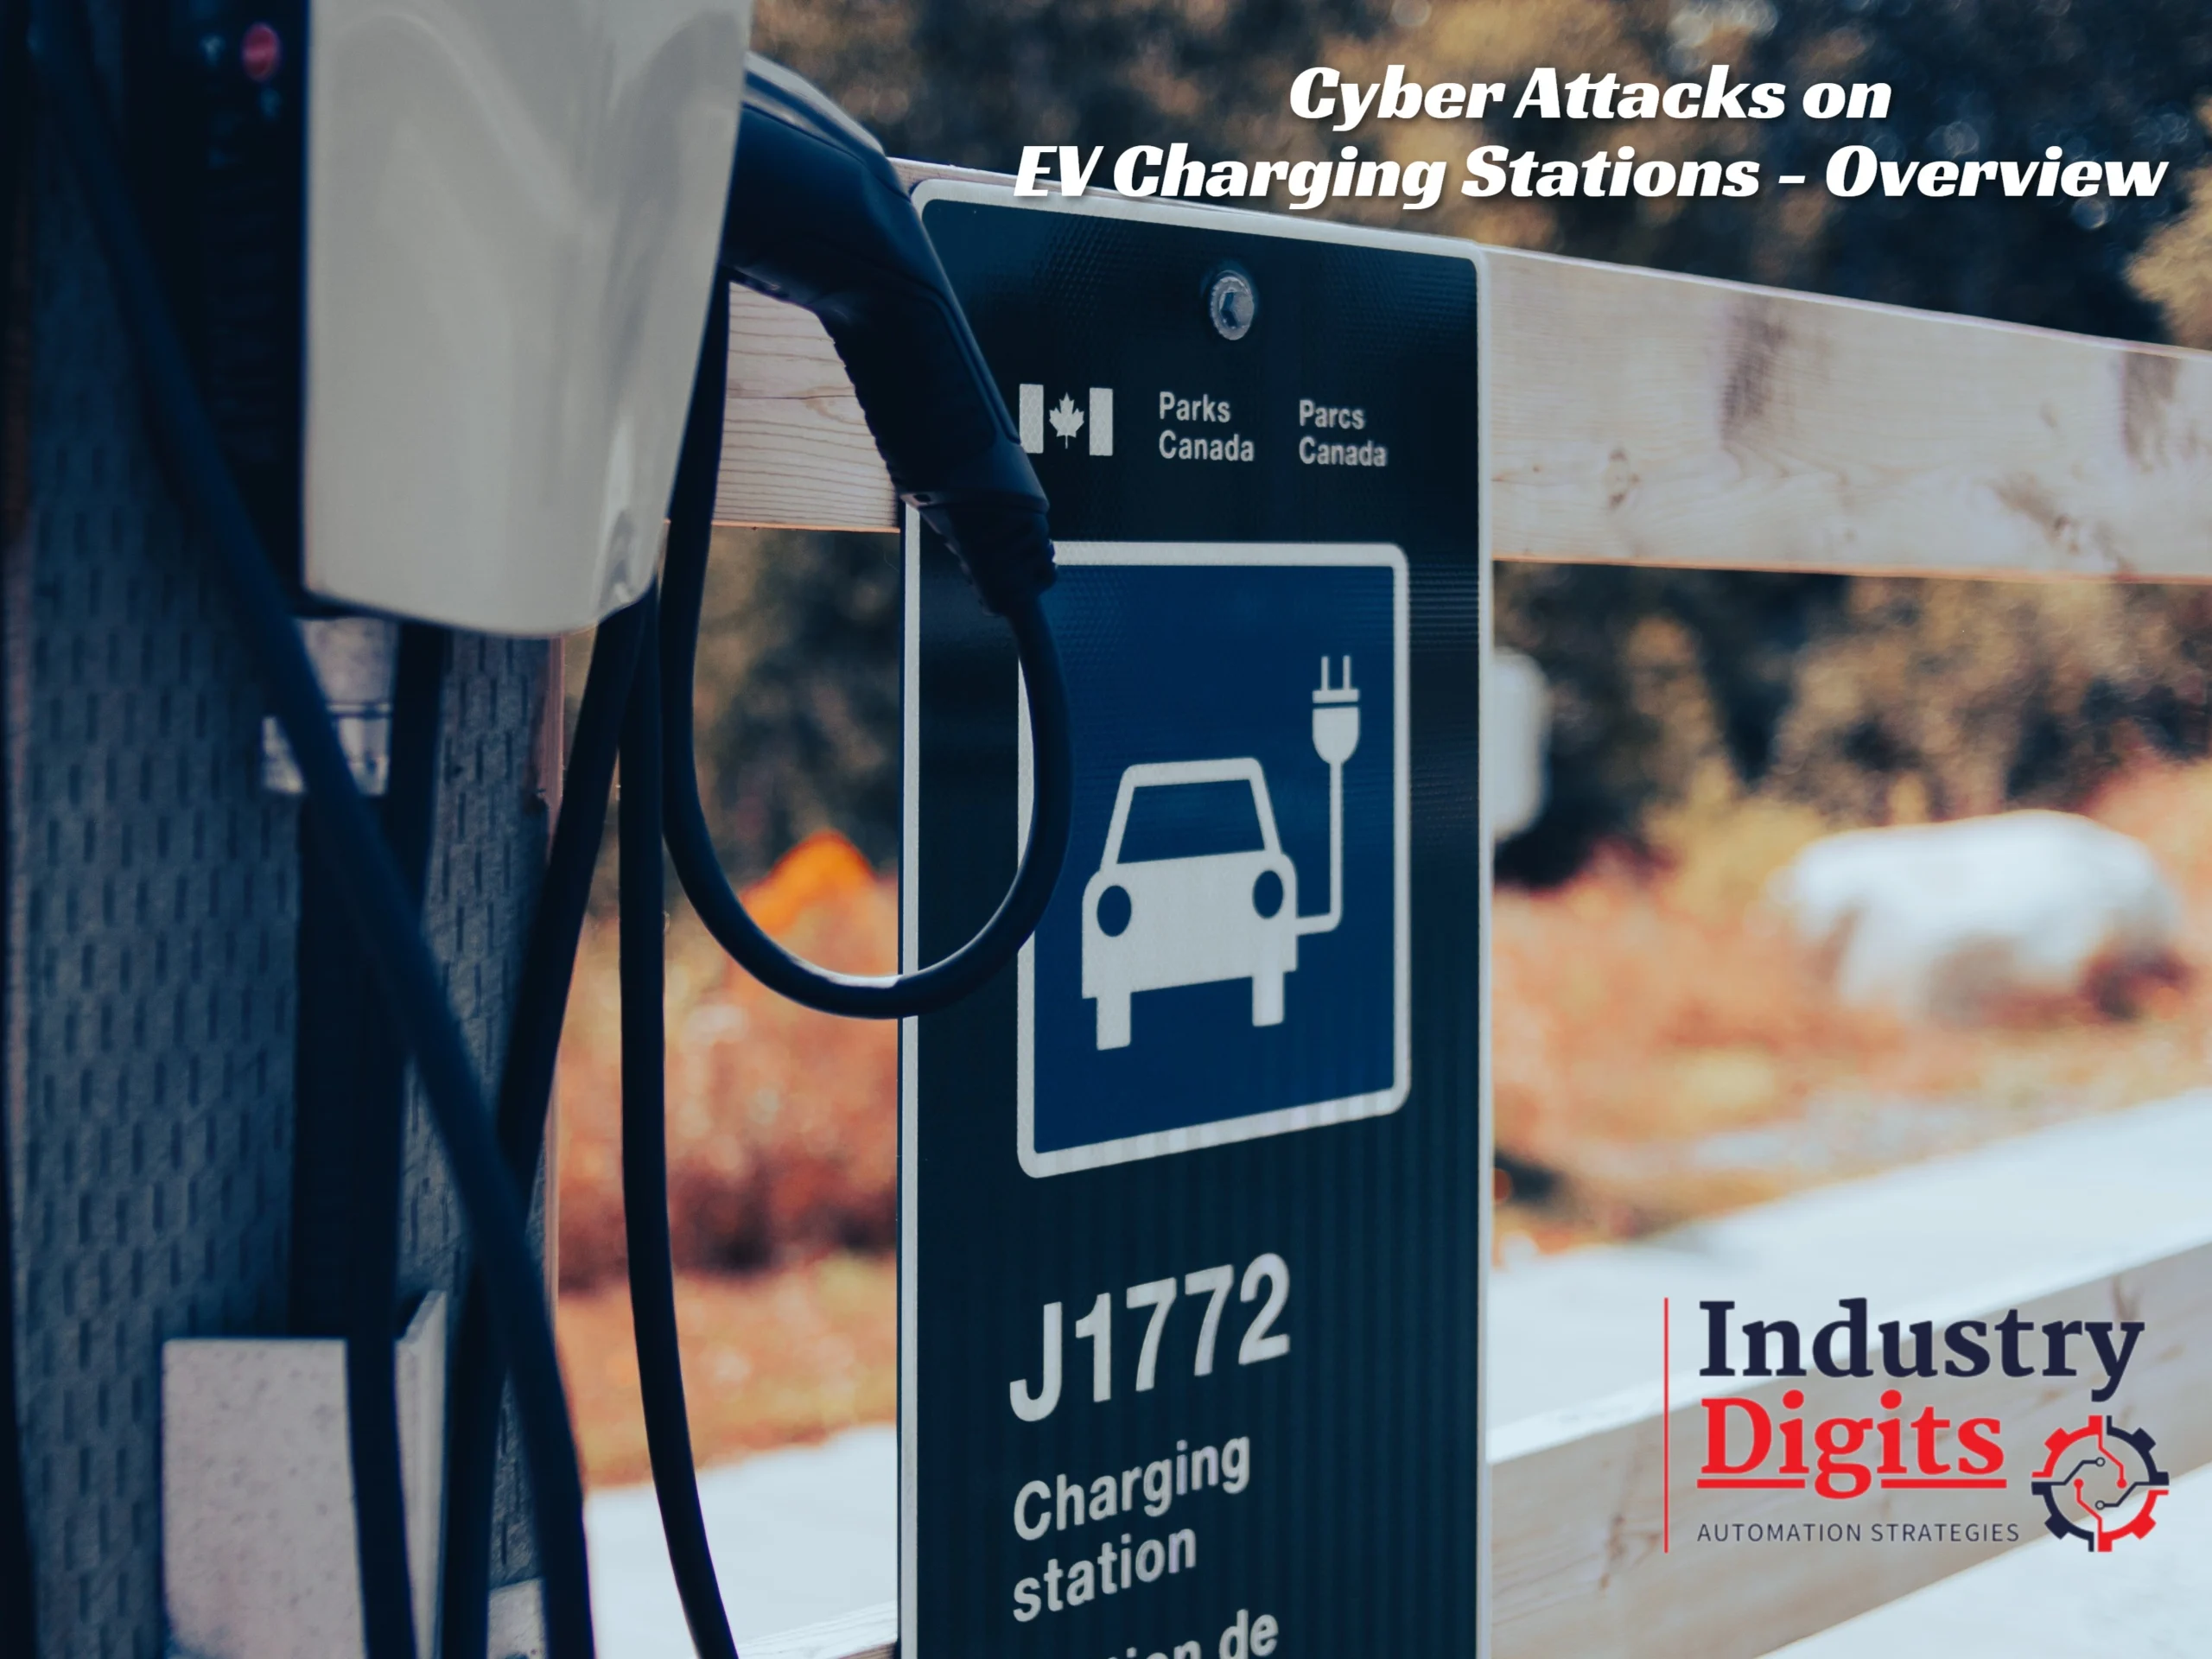 EV Charging stations Cyber Attacks